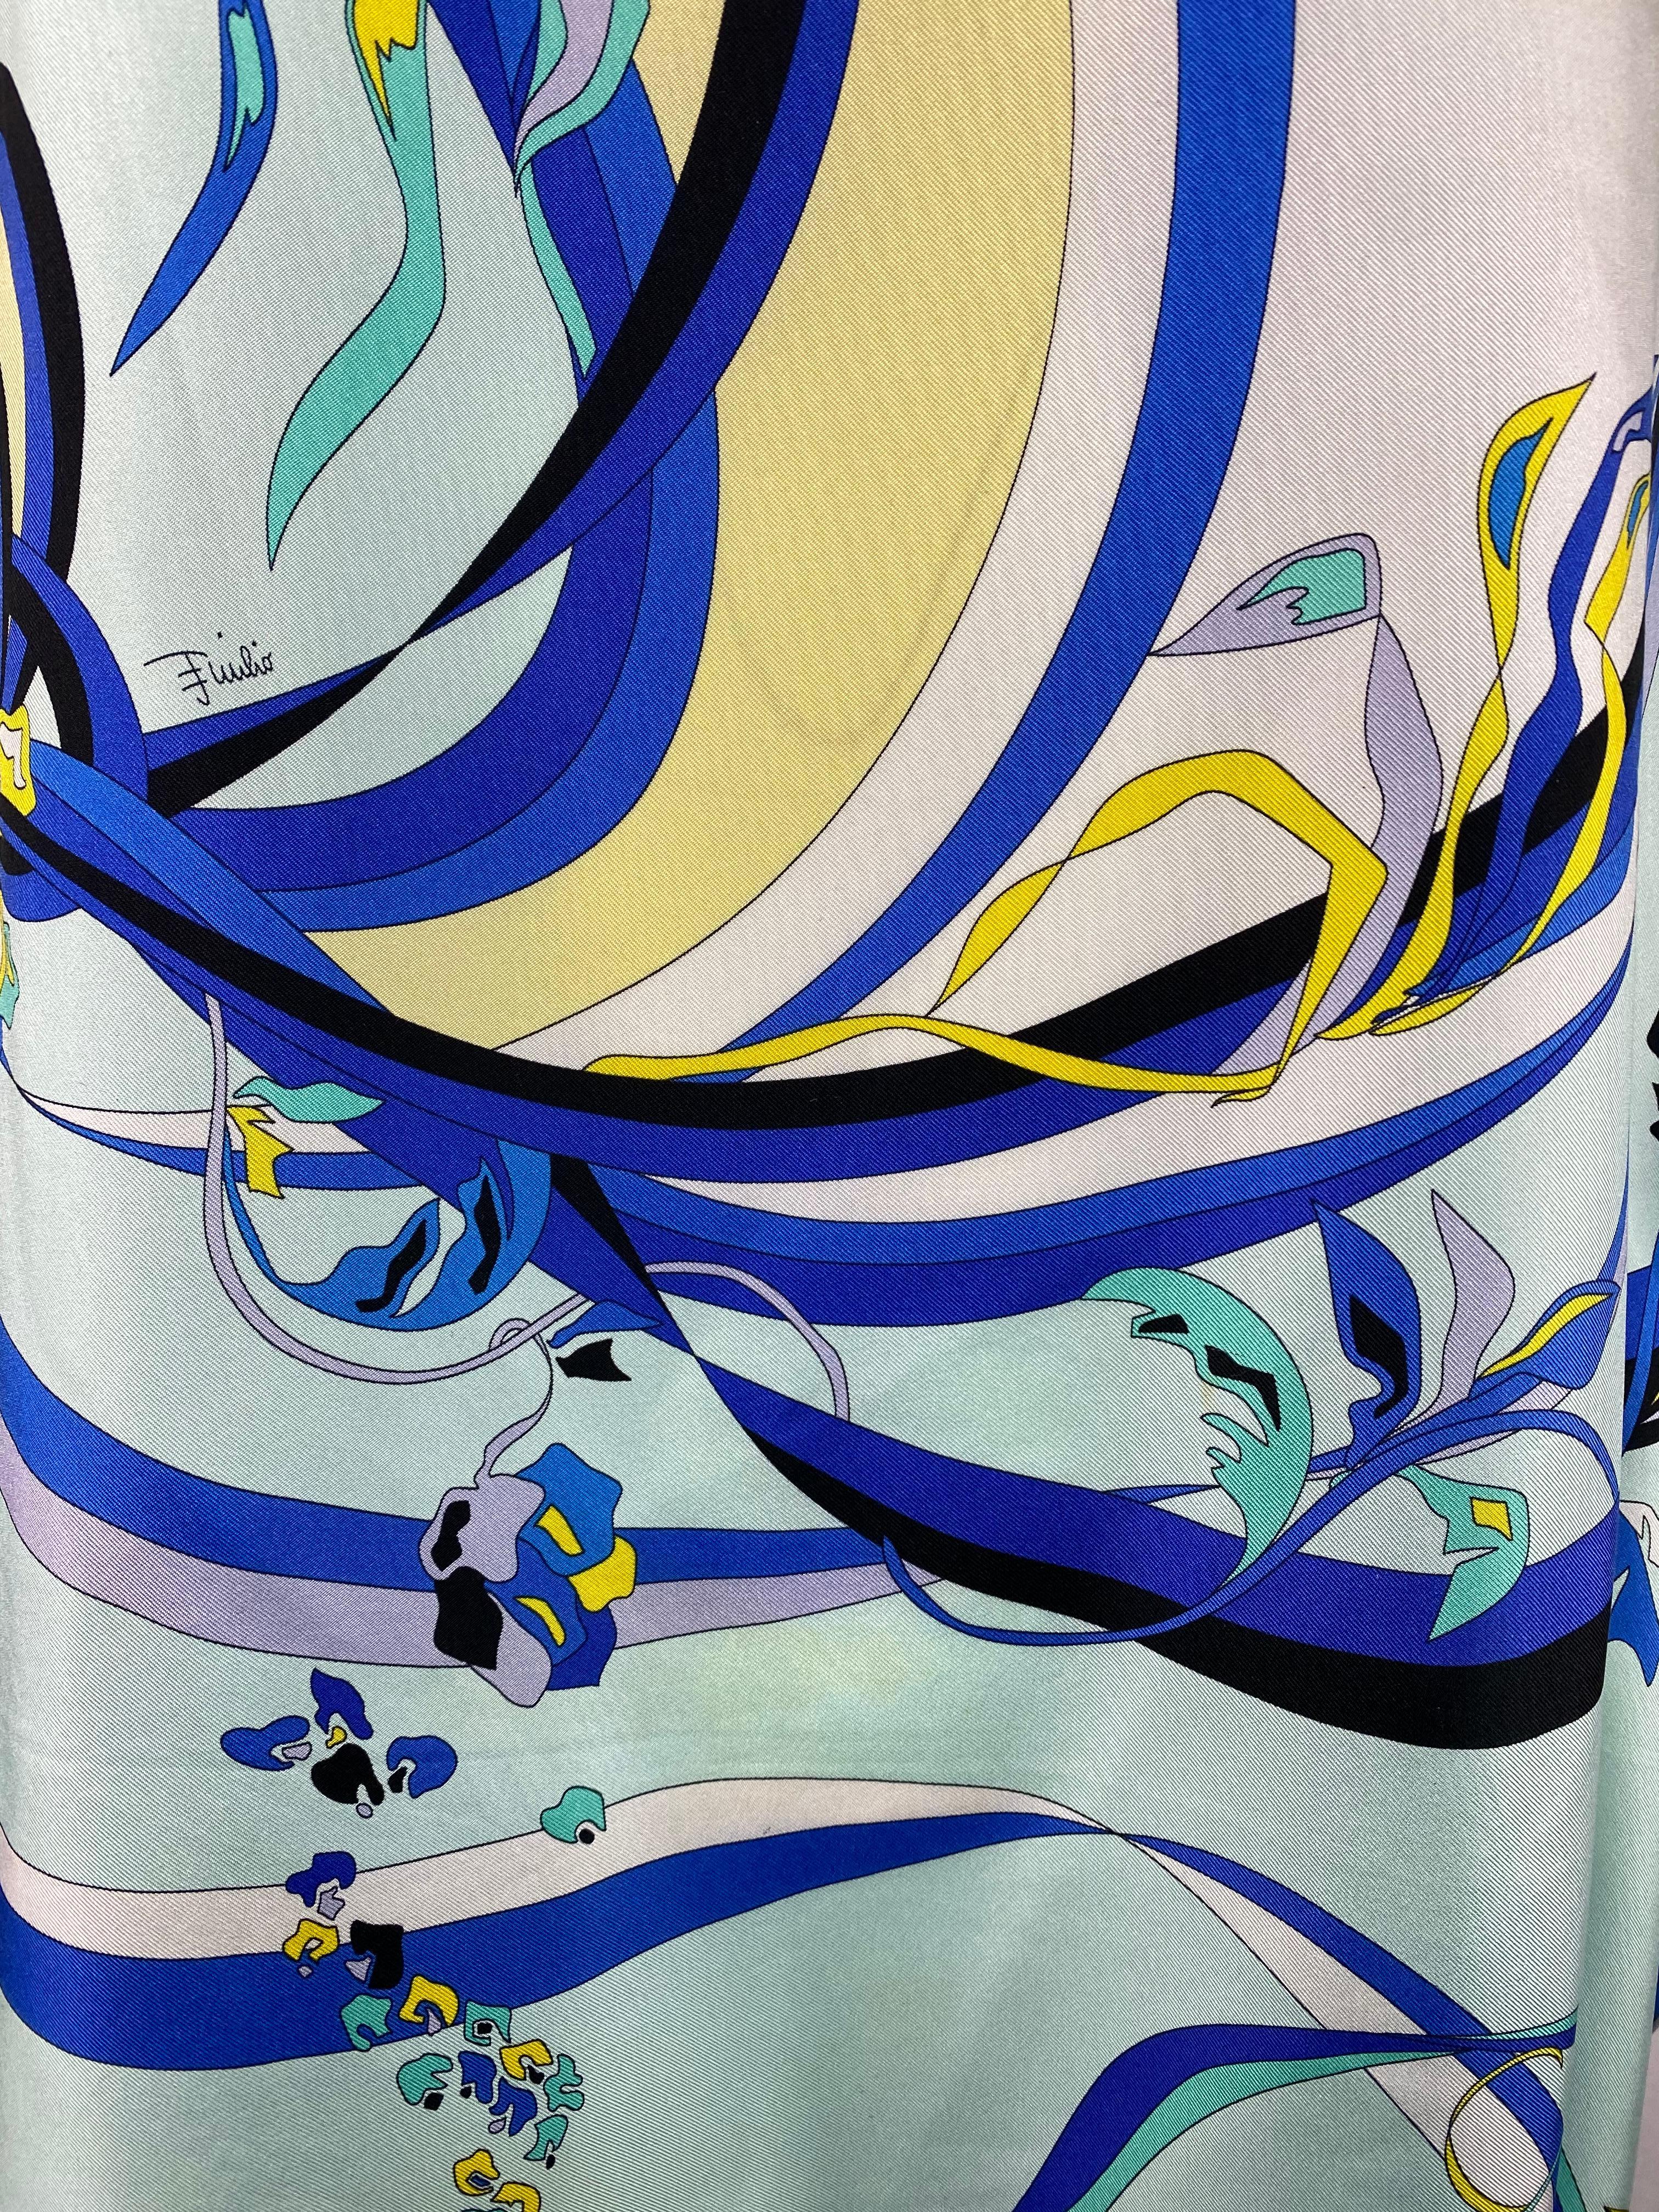 Product details:

The top features yellow and blue 100% silk with floral and geometric print. It can be styled as a cover up at the beach or it can be casually styled with the jeans. Made in Italy.